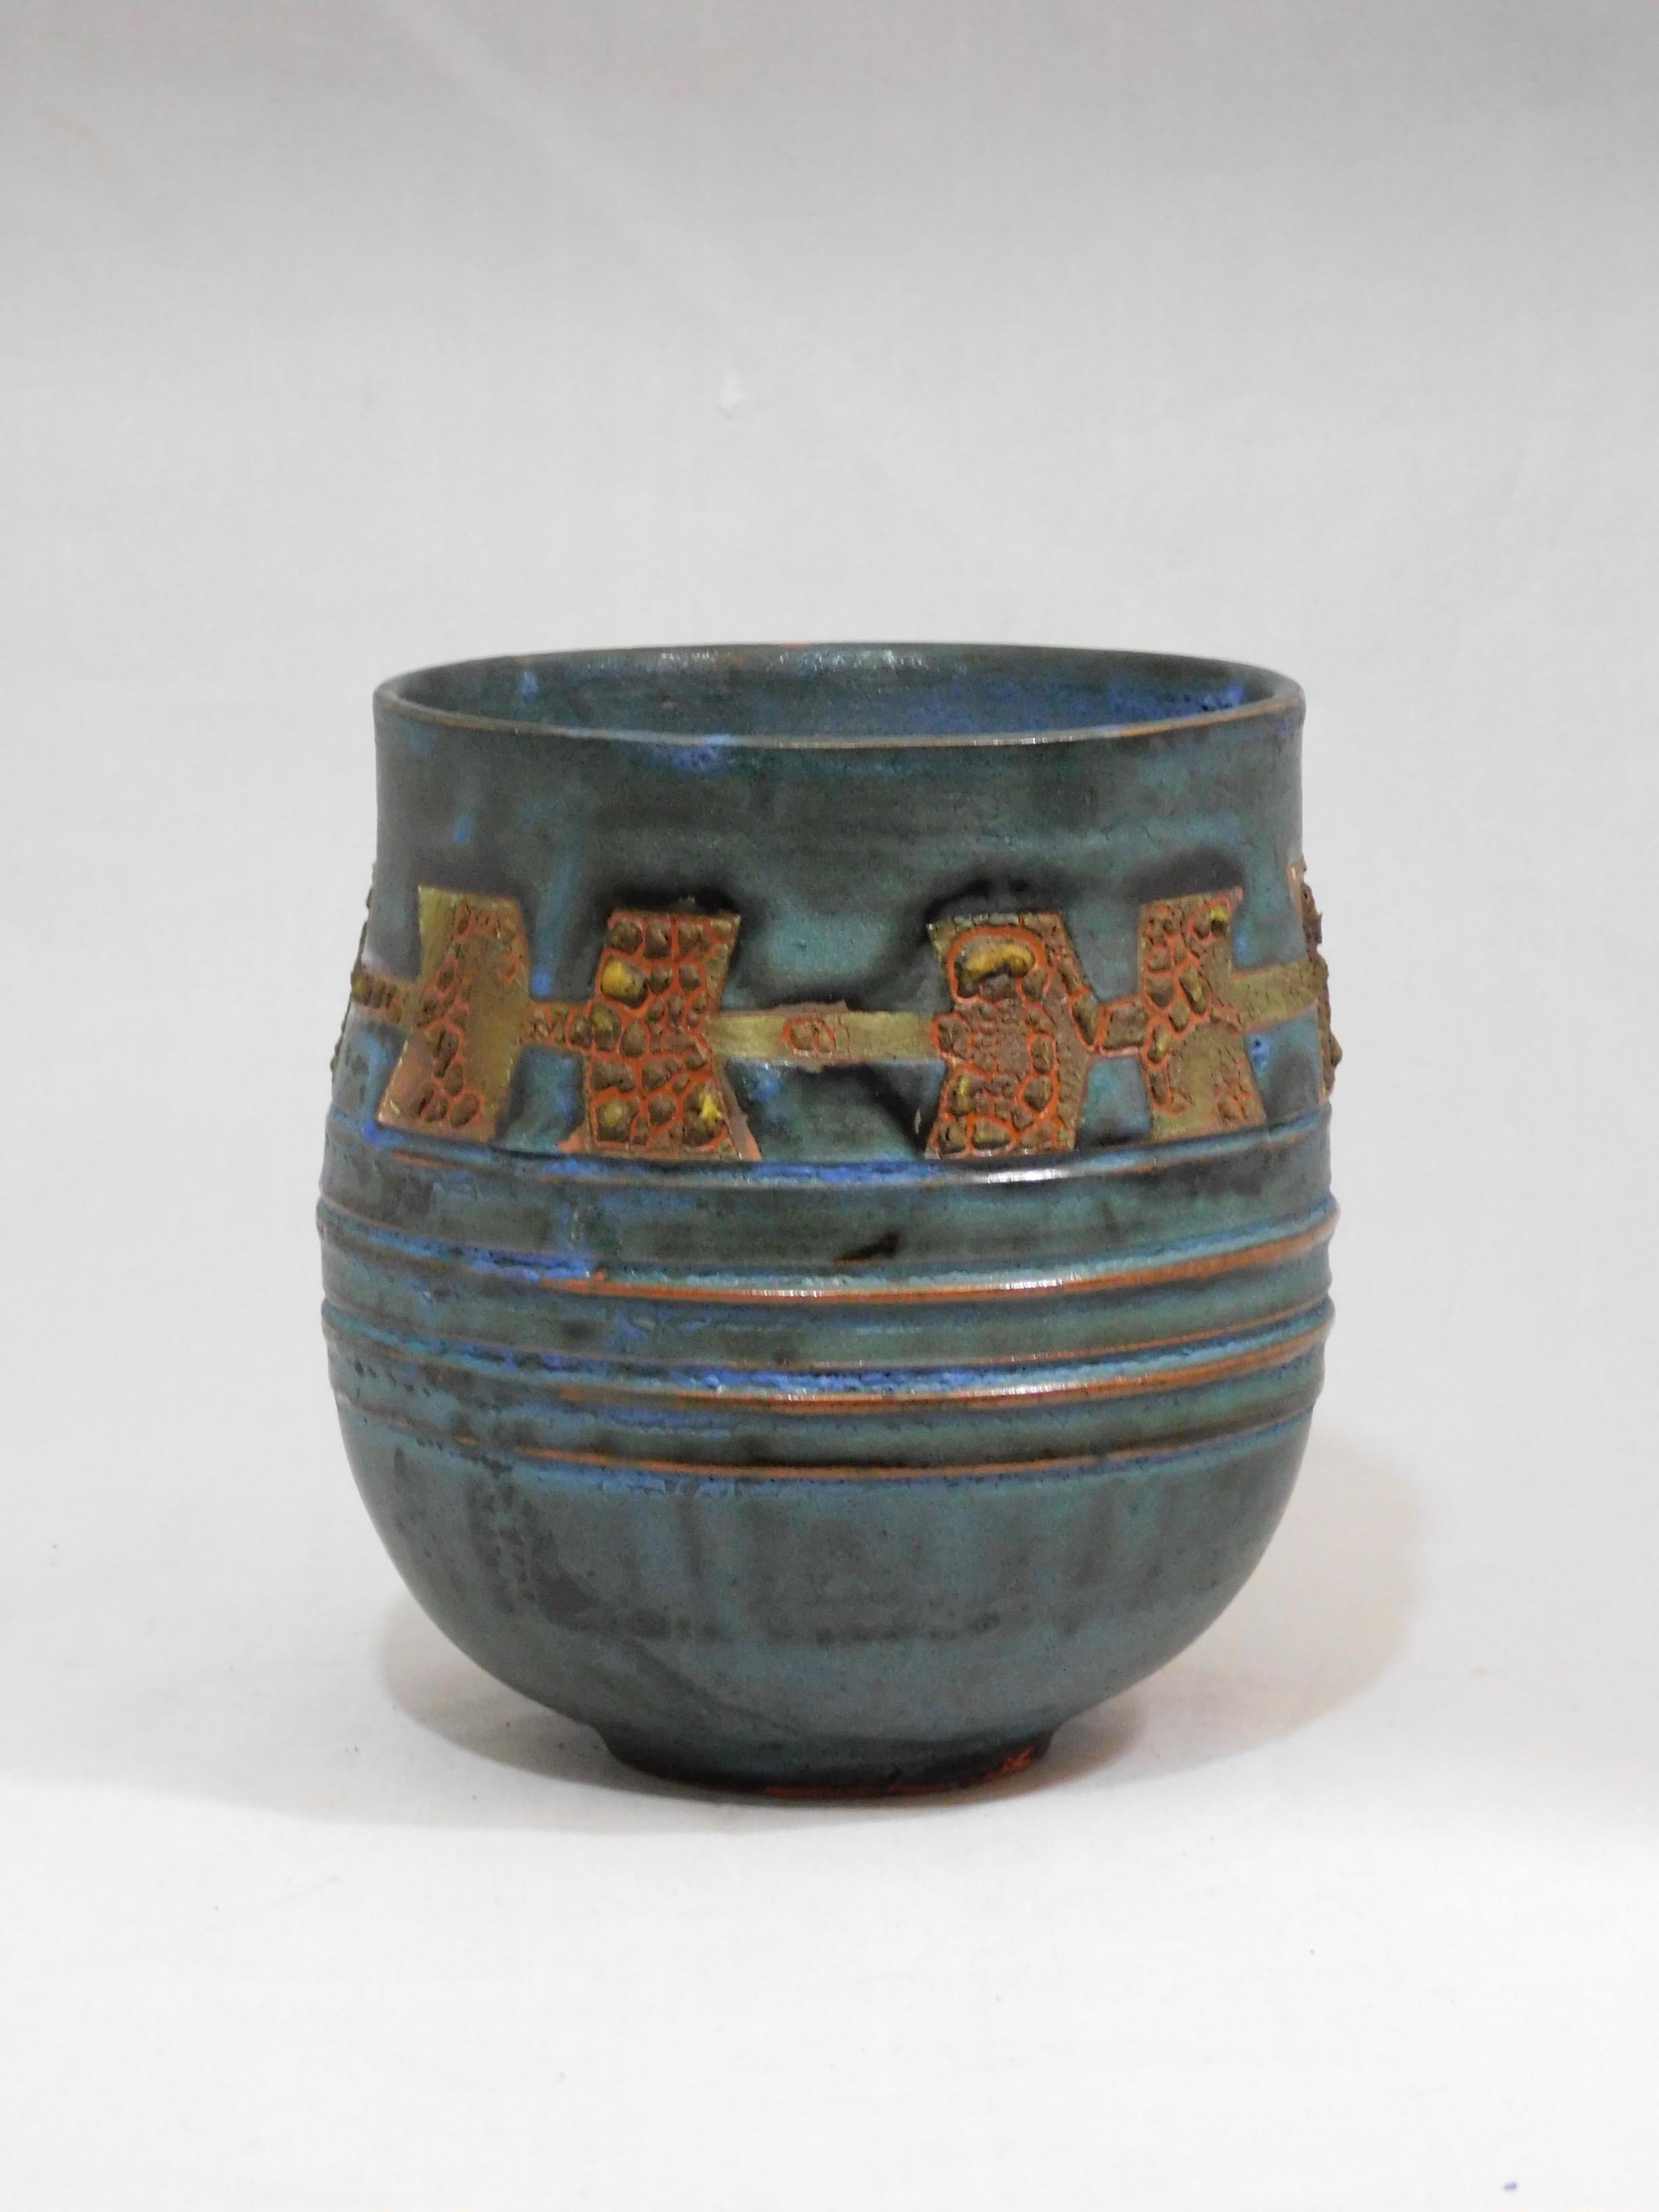 Wheel thrown Royal Canyon earthenware vessel by ceramicist Andrew Wilder. This is a one of a kind object made in the ancient way- by hand in a small artisanal pottery. In this series Wilder explores the application of lichen under glazes to achieve